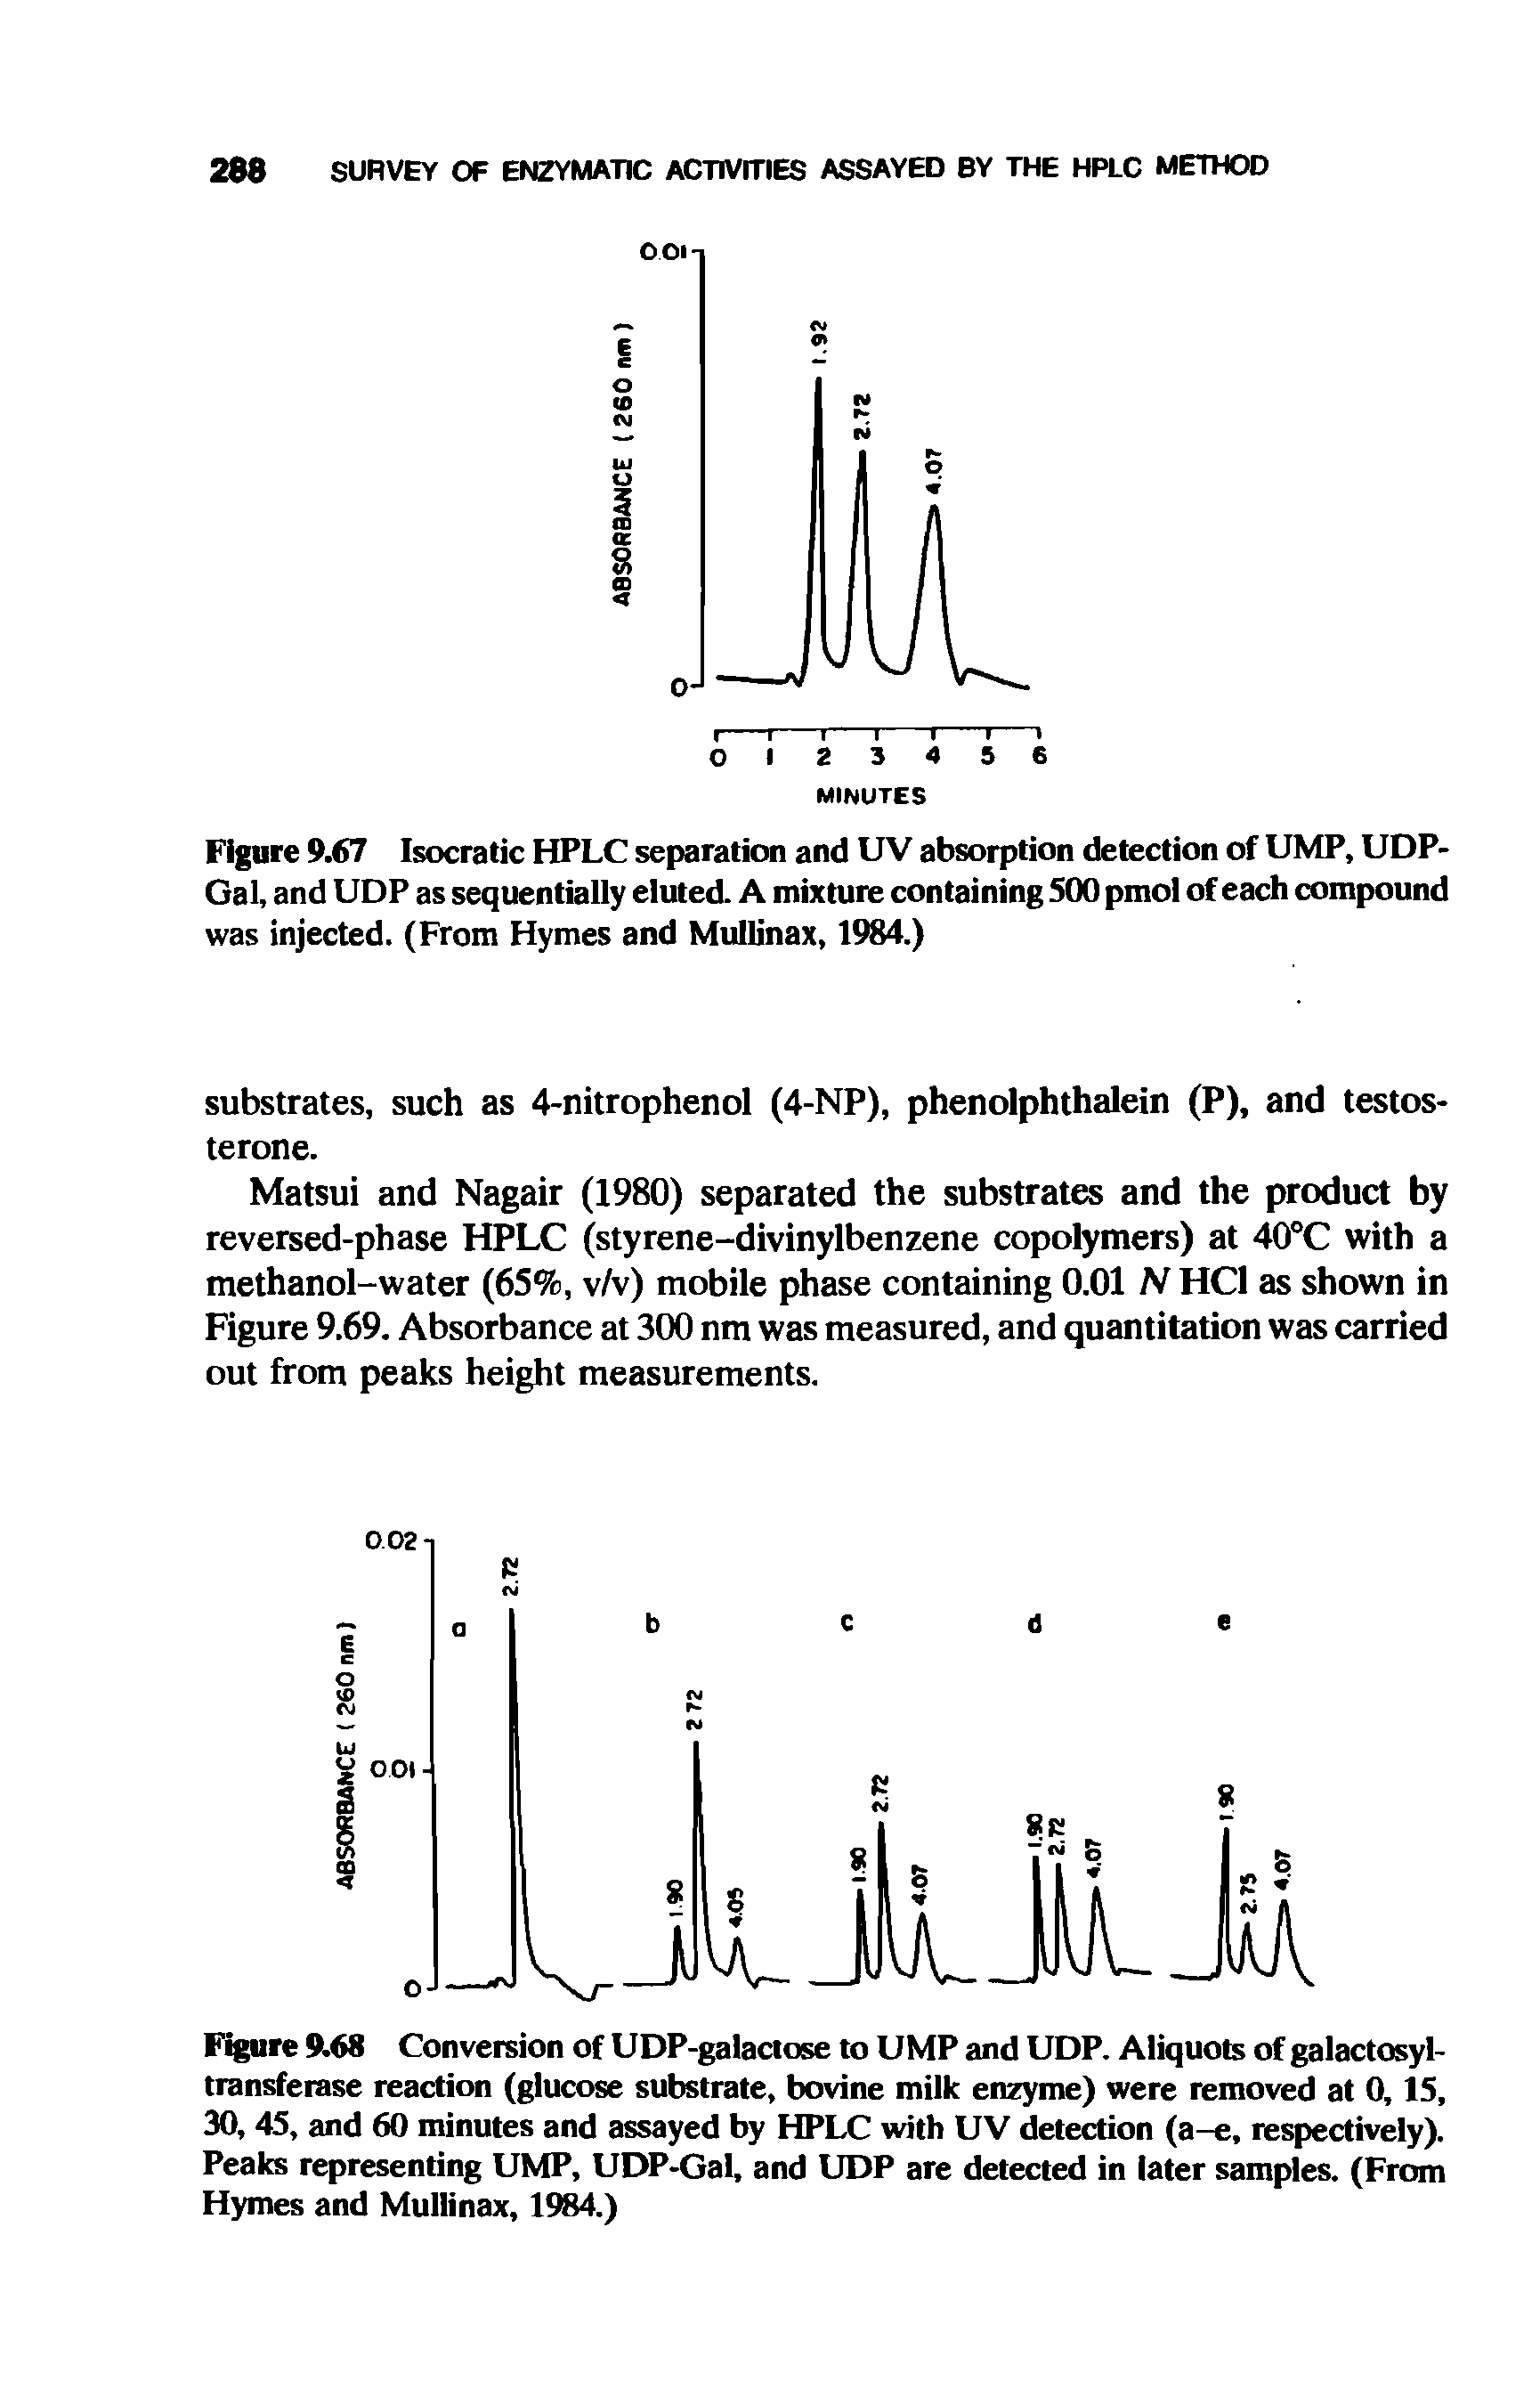 Figure 9.67 Isocratic HPLC separation and UV absorption detection of UMP, UDP-Gal, and UDP as sequentially eluted. A mixture containing 500 pmol of each compound was injected. (From Hymes and Mullinax, 1984.)...